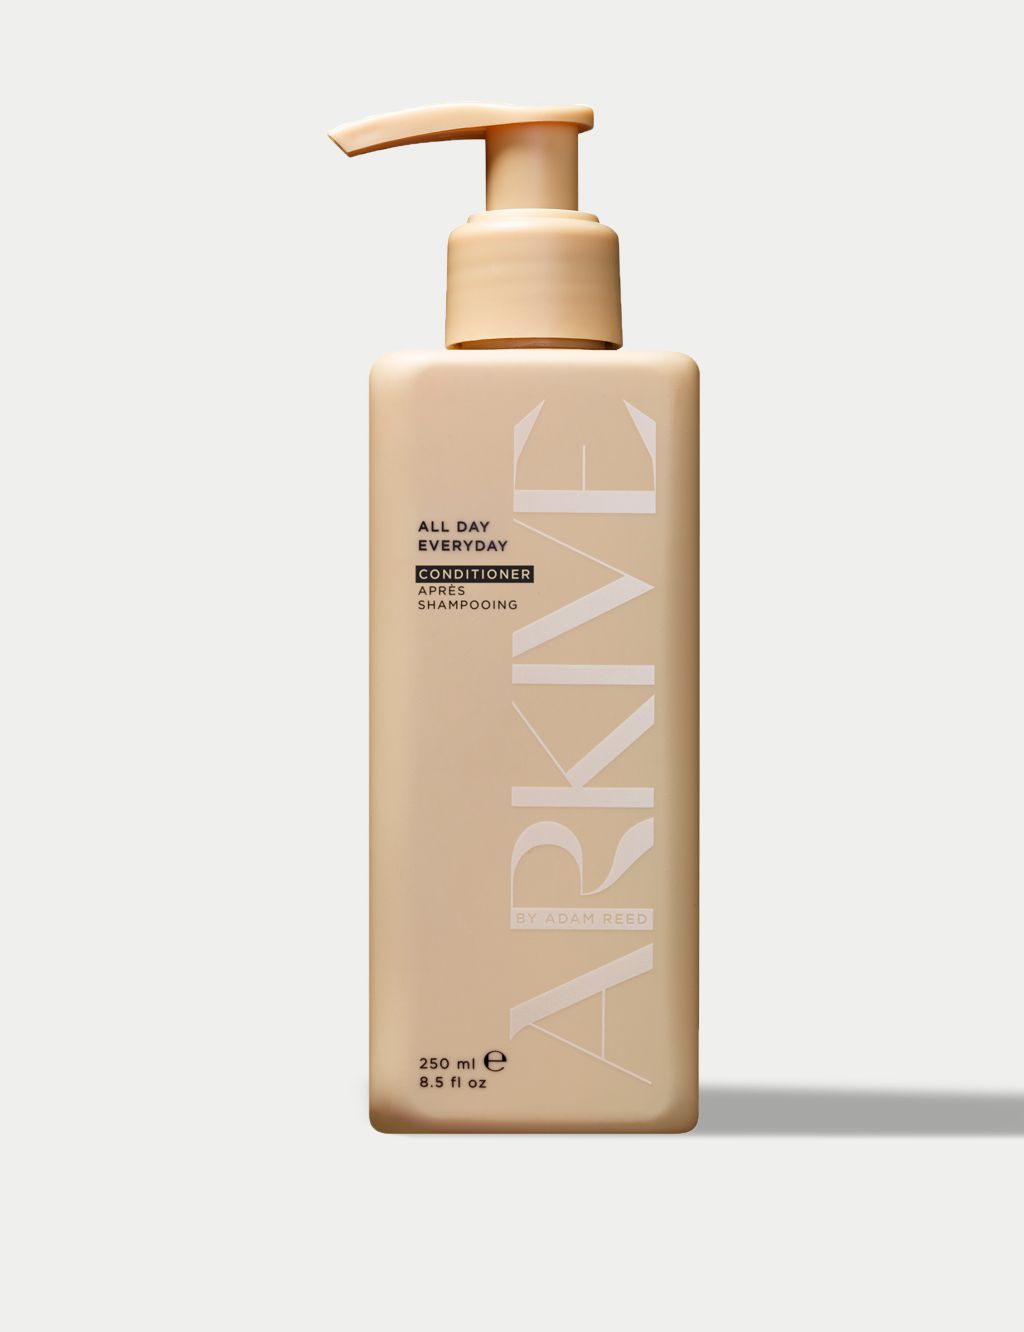 All Day Everyday Conditioner 250ml